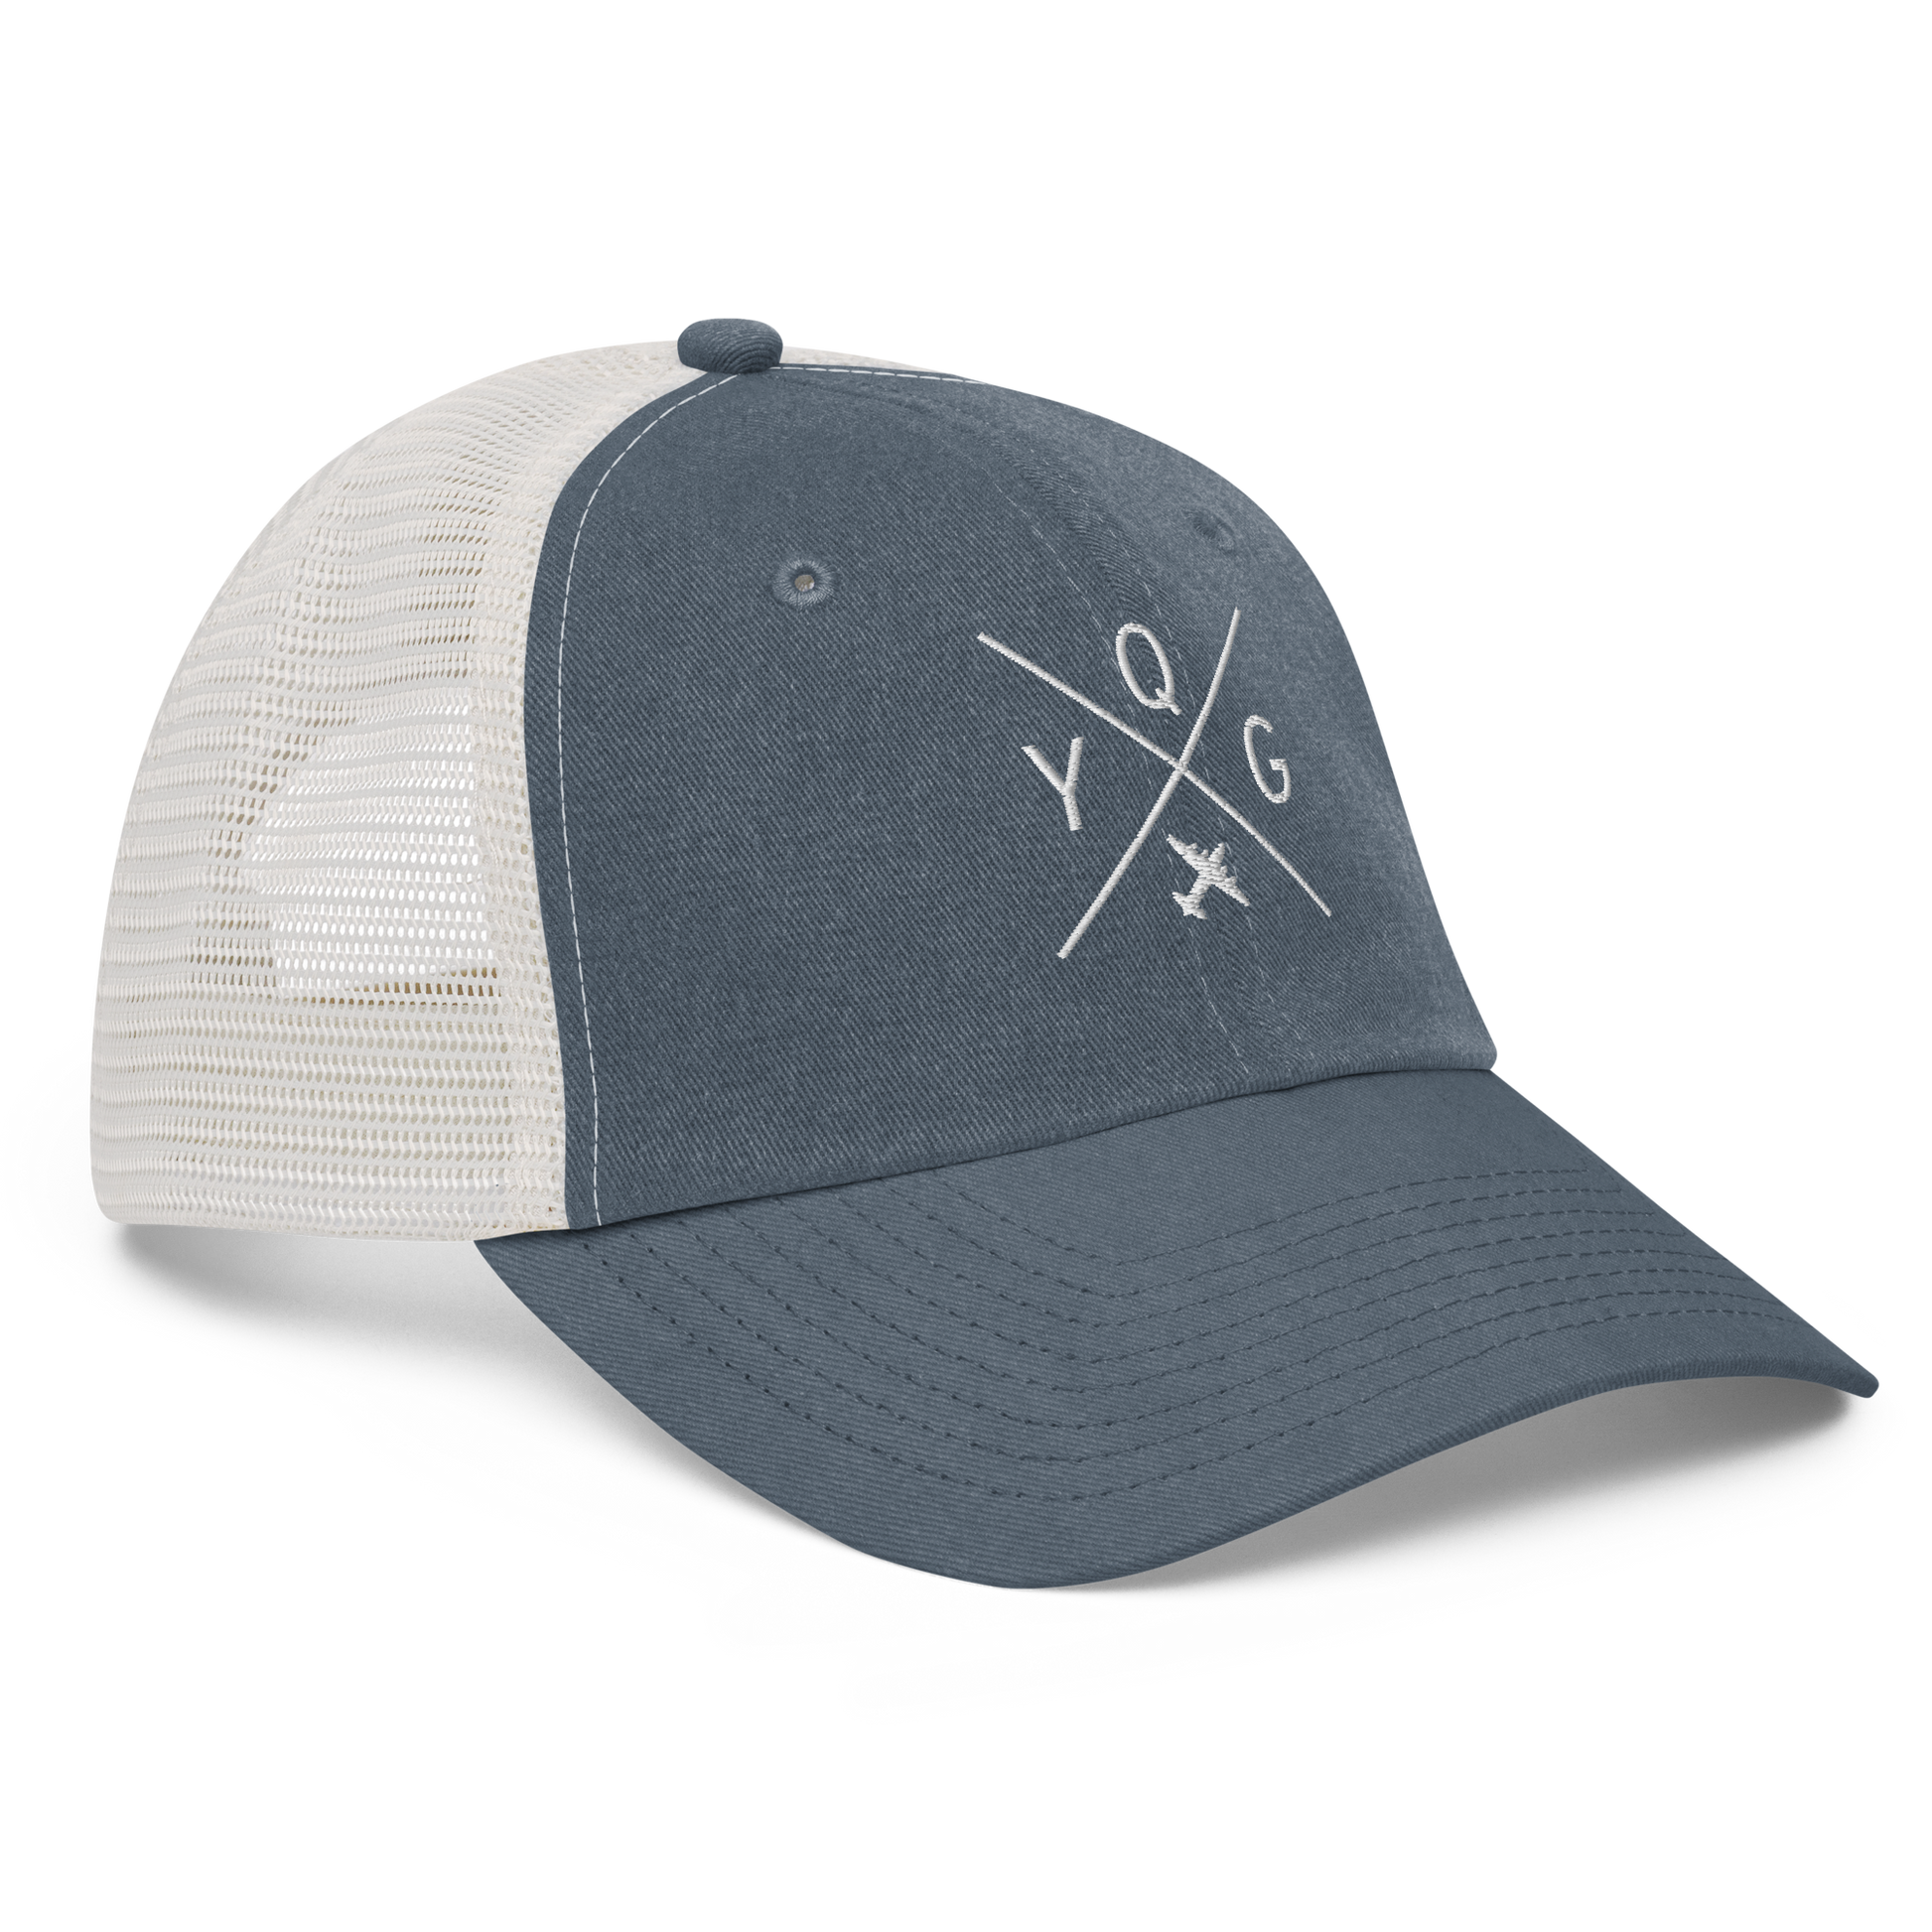 YHM Designs - YQG Windsor Pigment-Dyed Trucker Cap - Crossed-X Design with Airport Code and Vintage Propliner - White Embroidery - Image 07